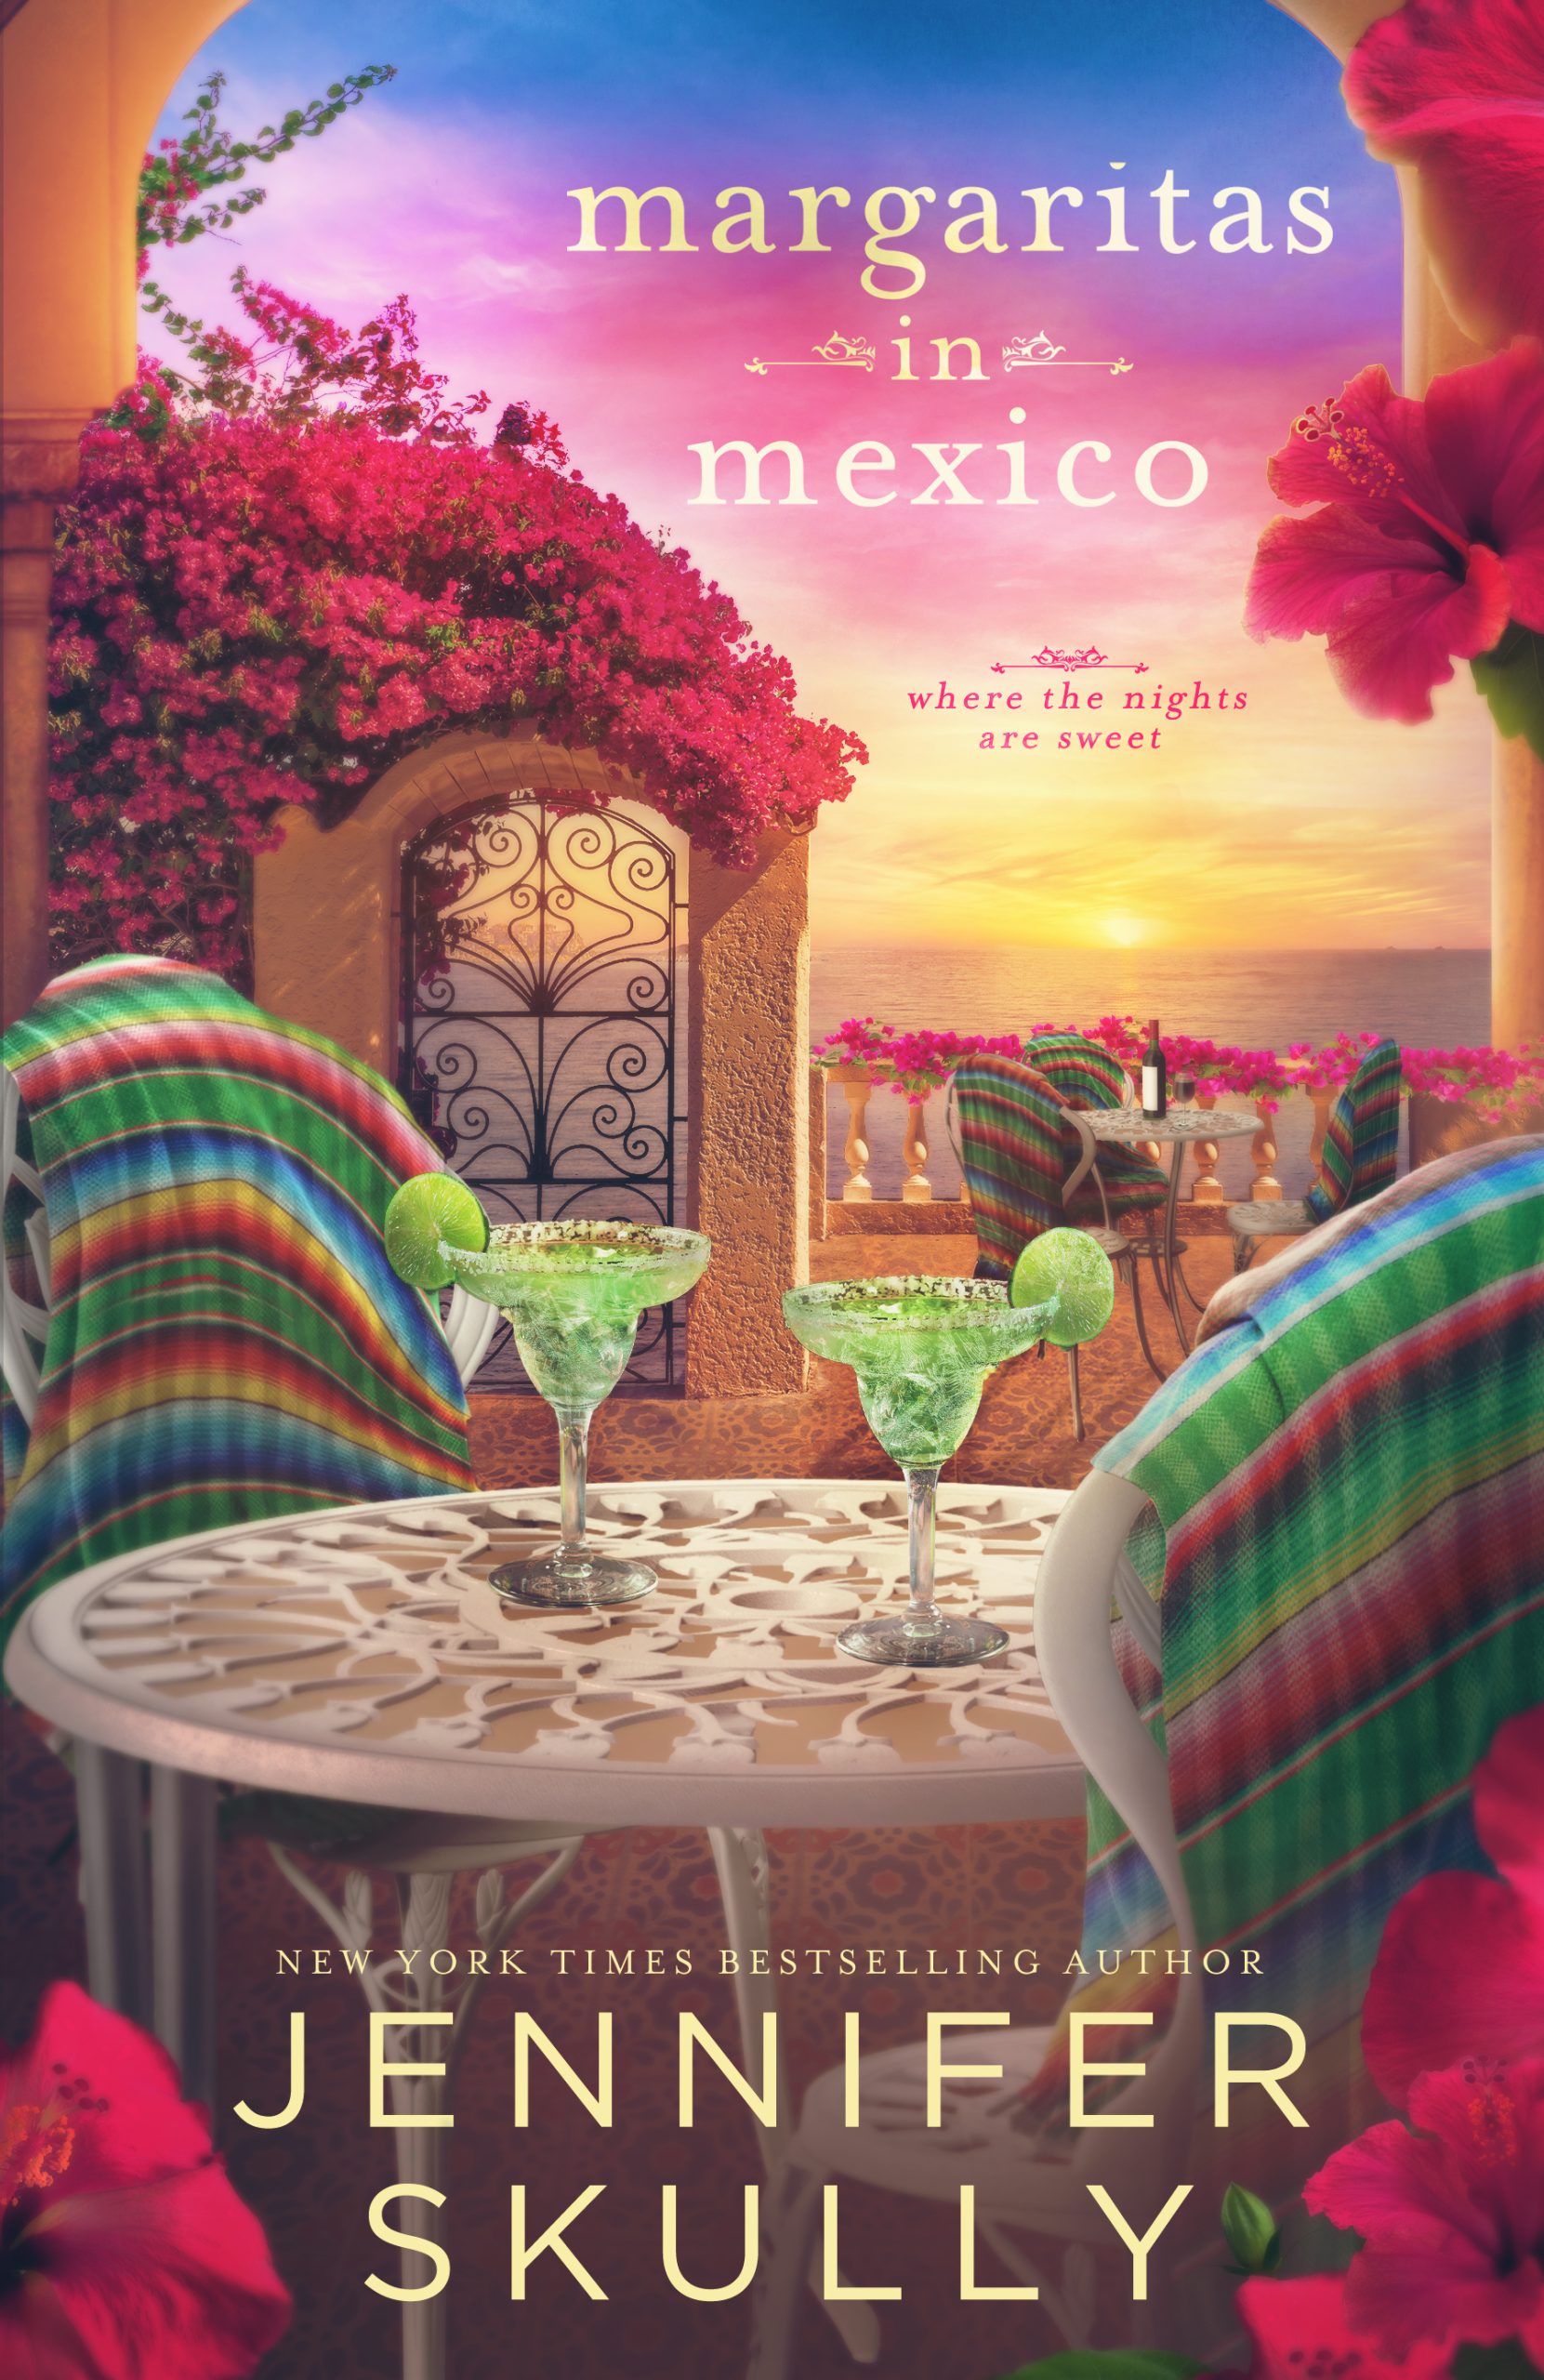 Cover of Margaritas in Mexico - where the nights are sweet - by New York Times Bestselling Author Jennifer Skully